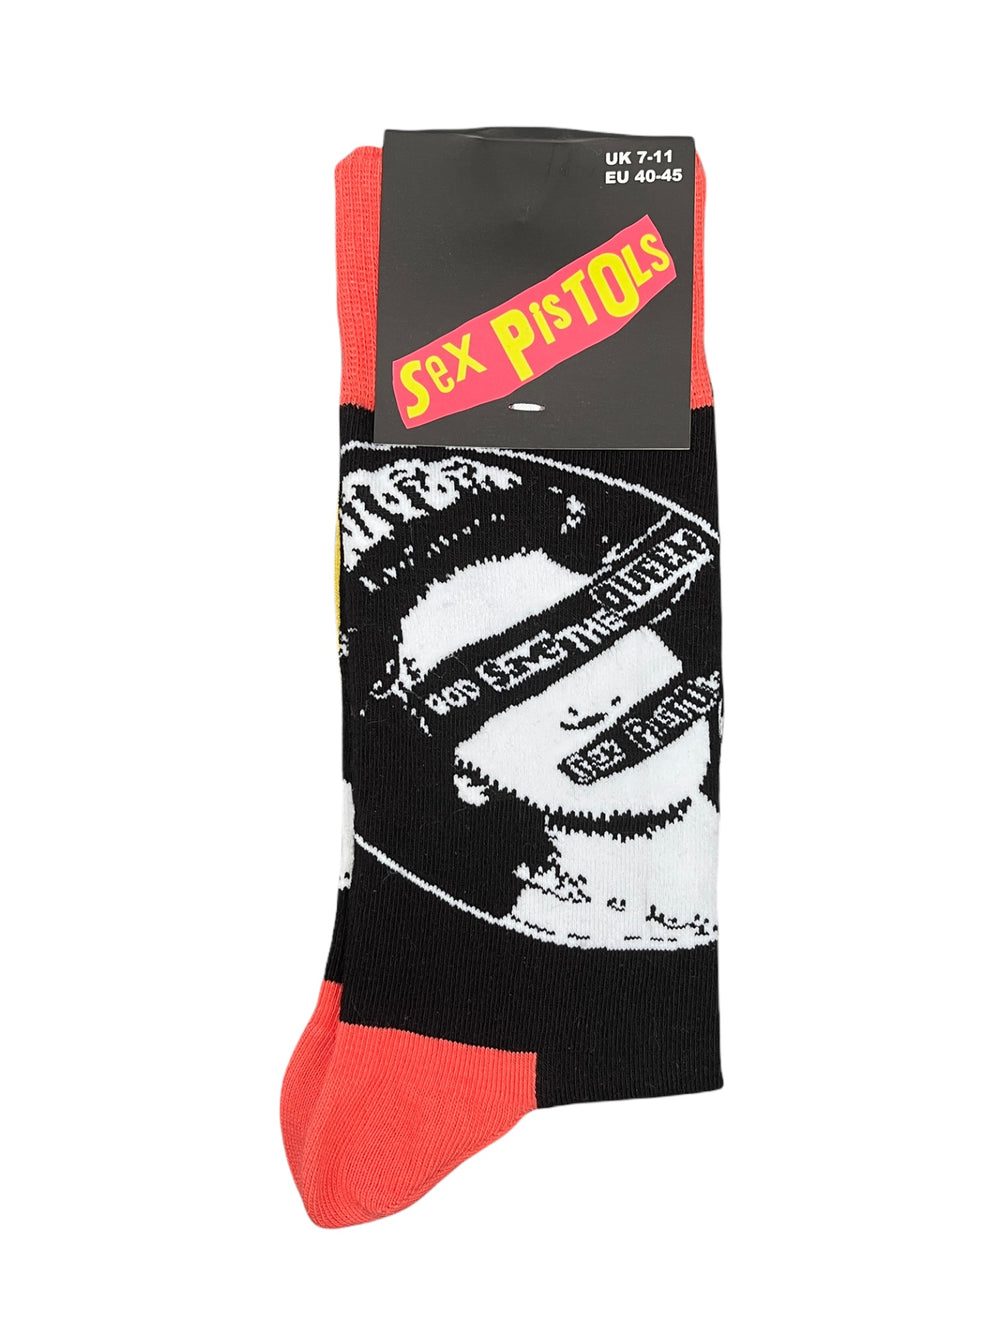 Sex Pistols God Save The Queen Official Product 1 Pair Jacquard Socks Brand New